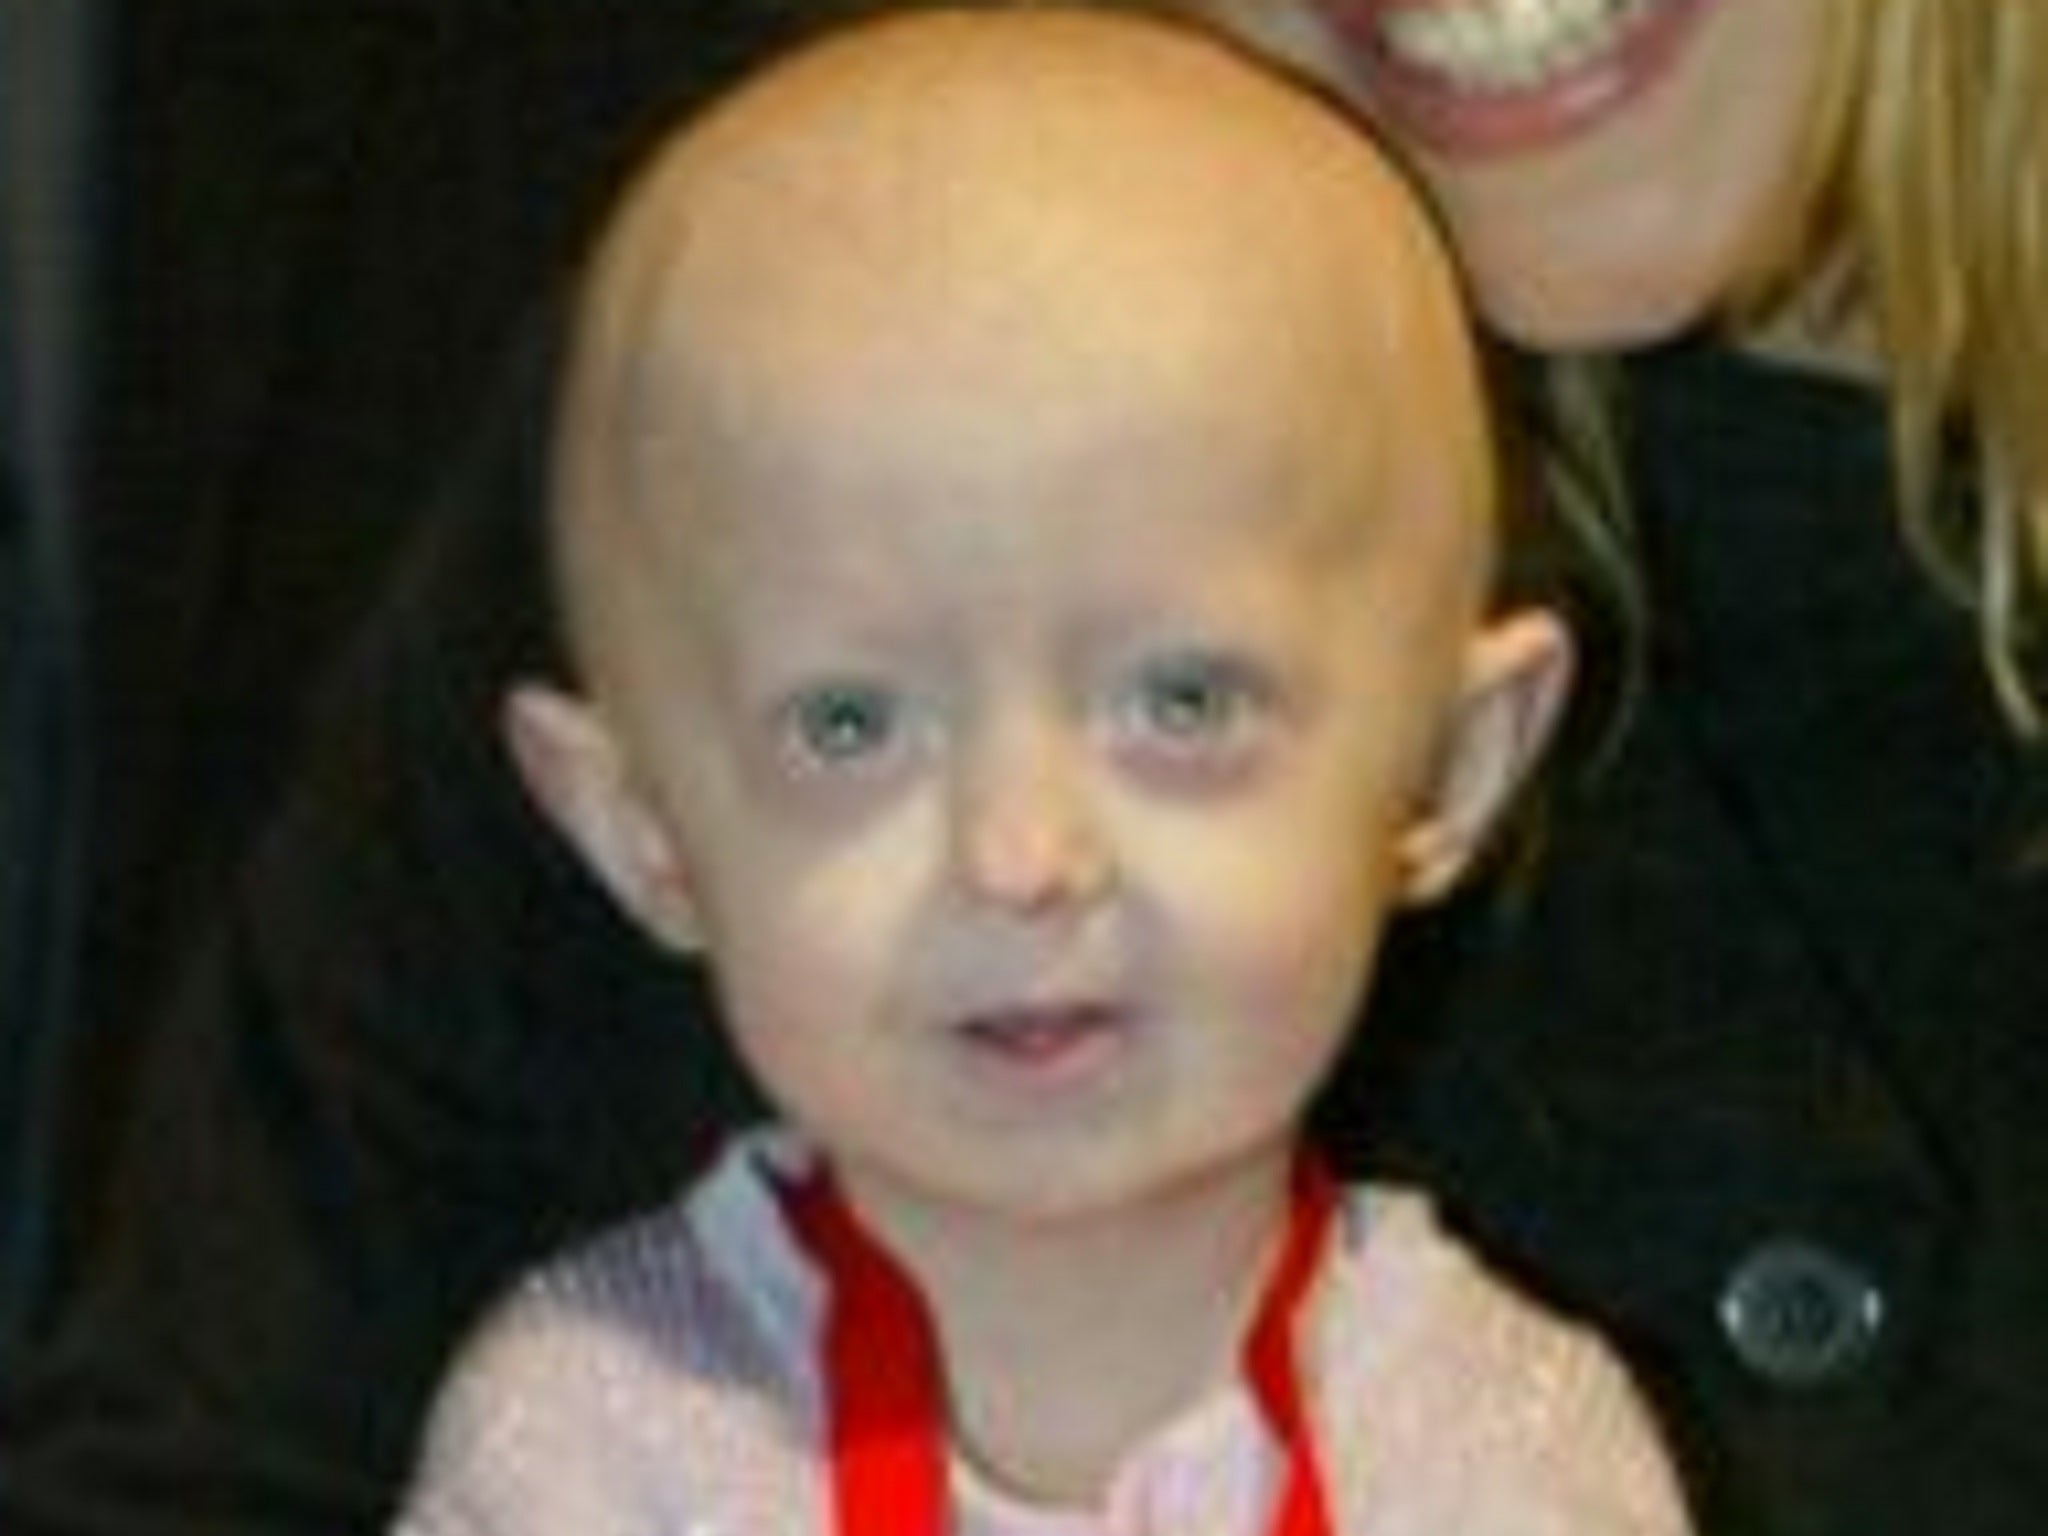 Hayley Okines, who had progeria and died aged 17 from pneumonia, was expected to only live until the age of 13